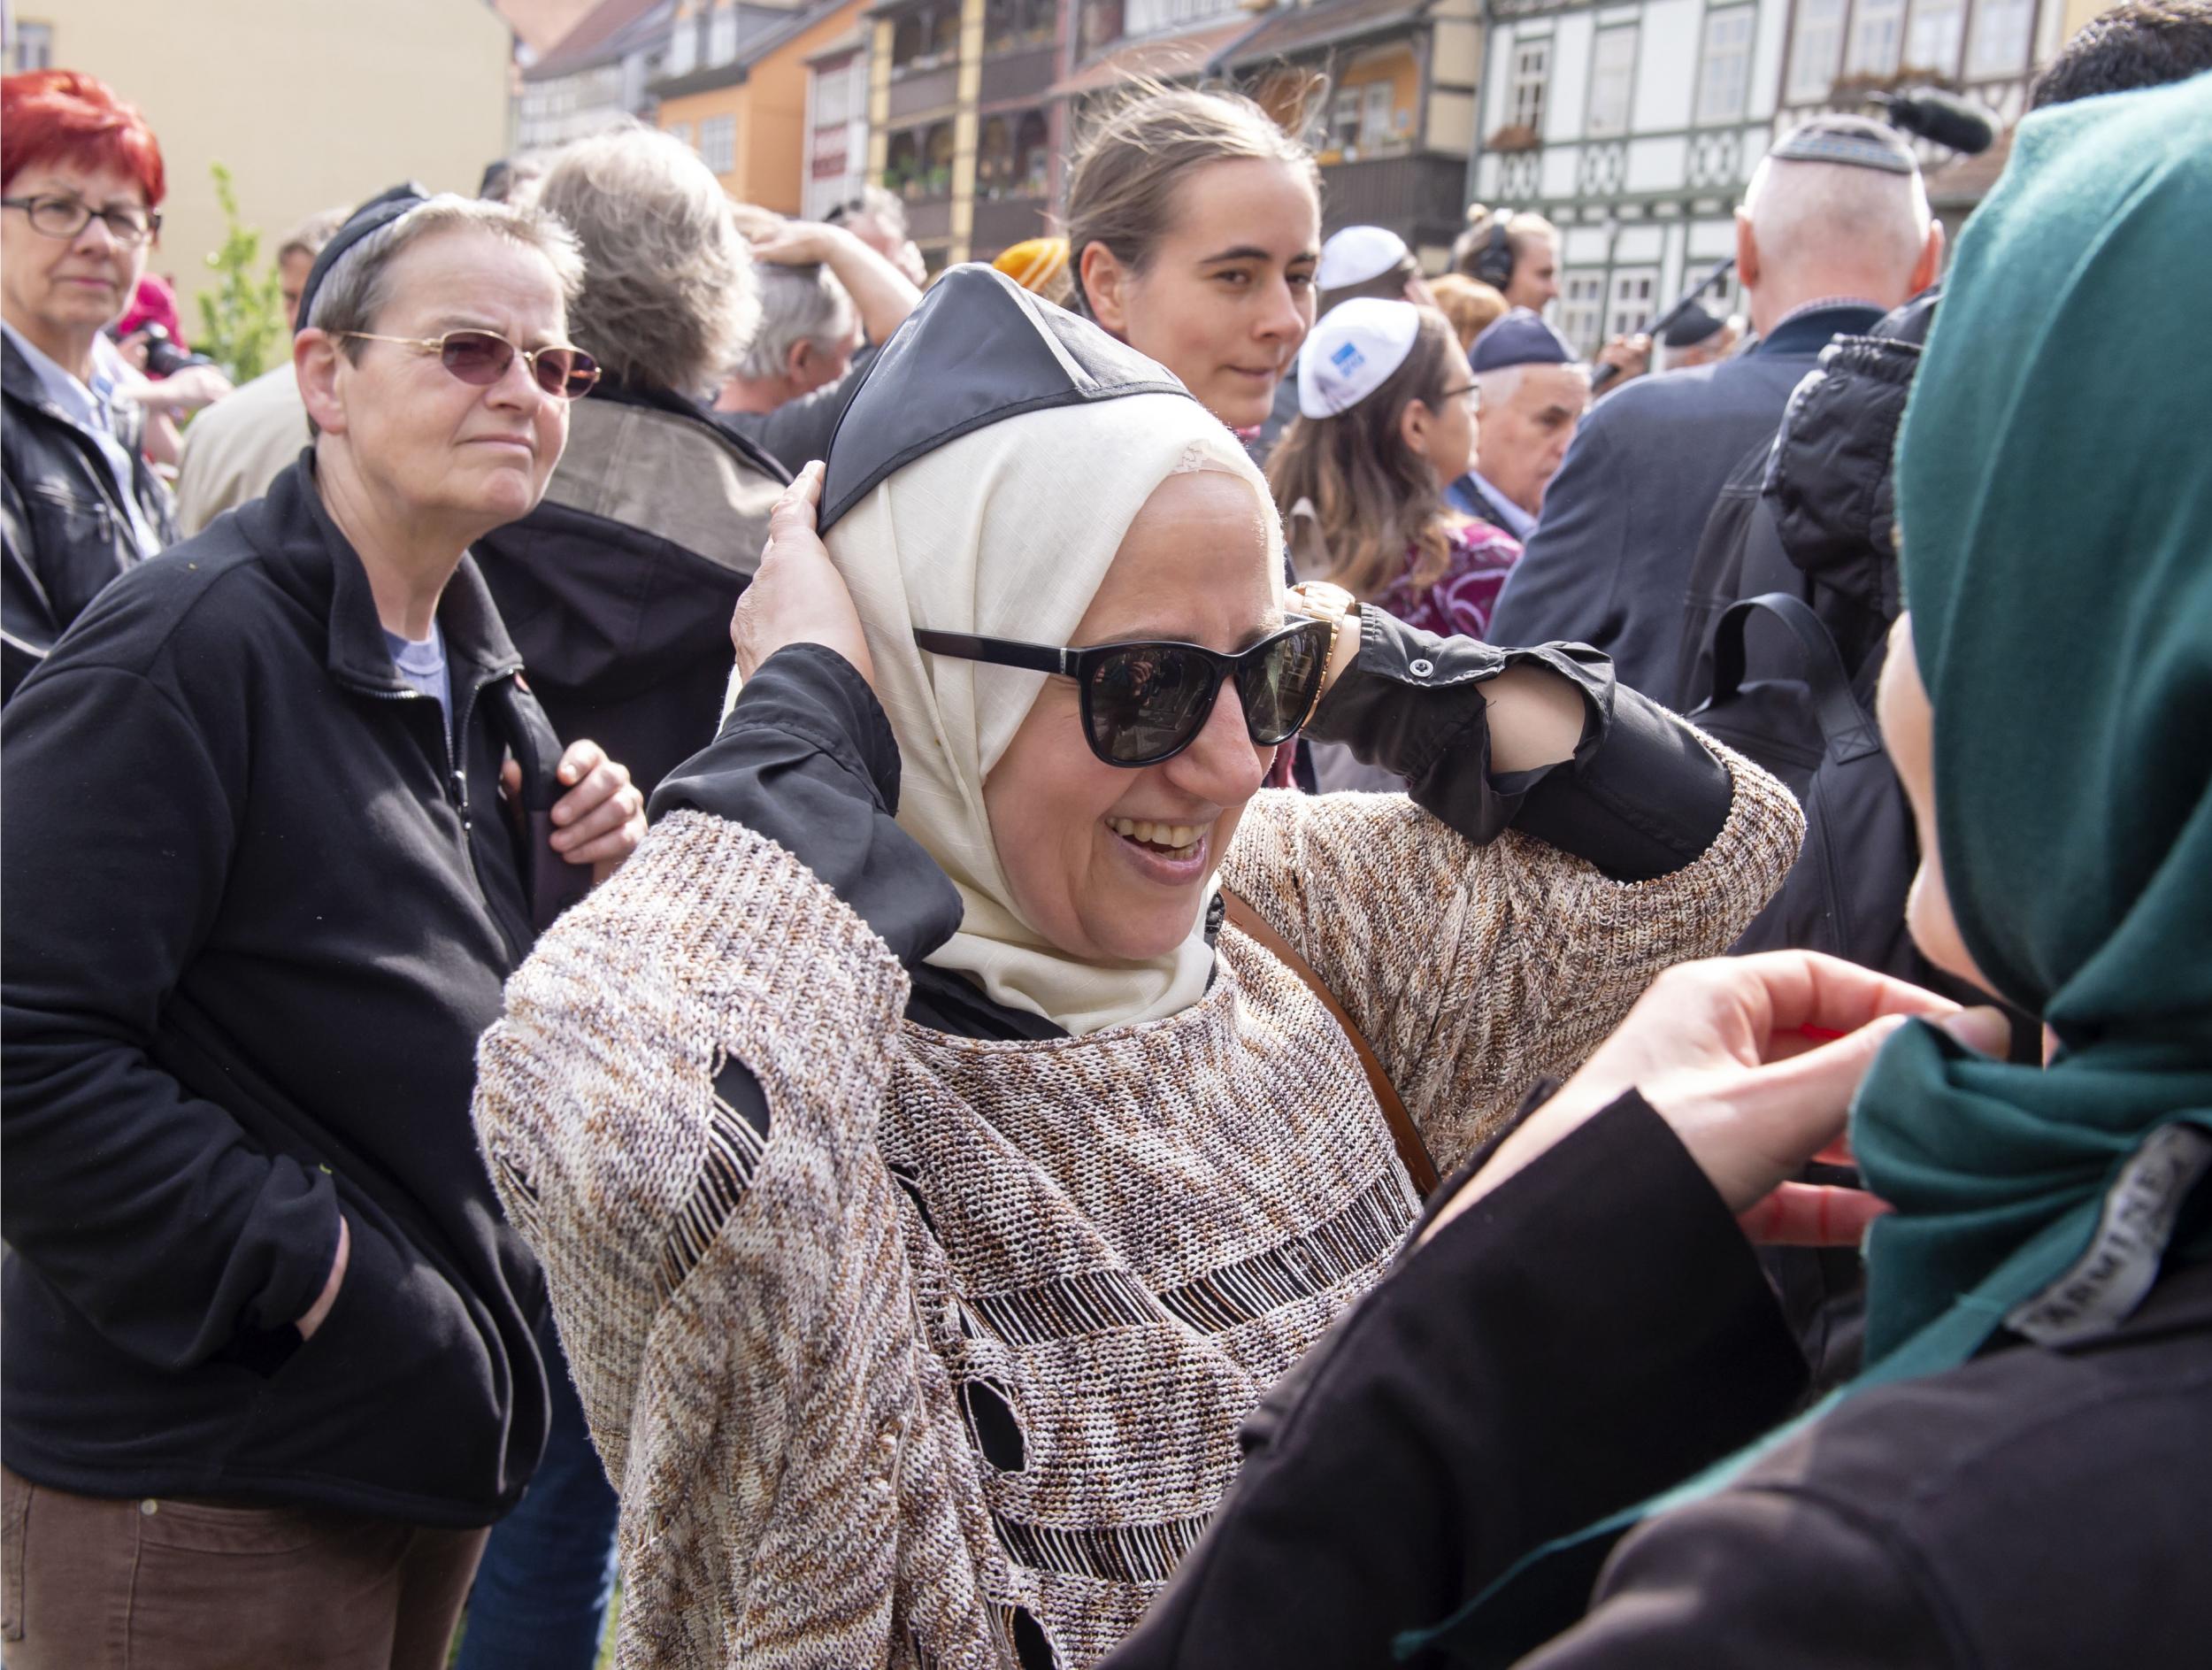 A Muslim woman wears the Kippah during a demonstration against antisemitism